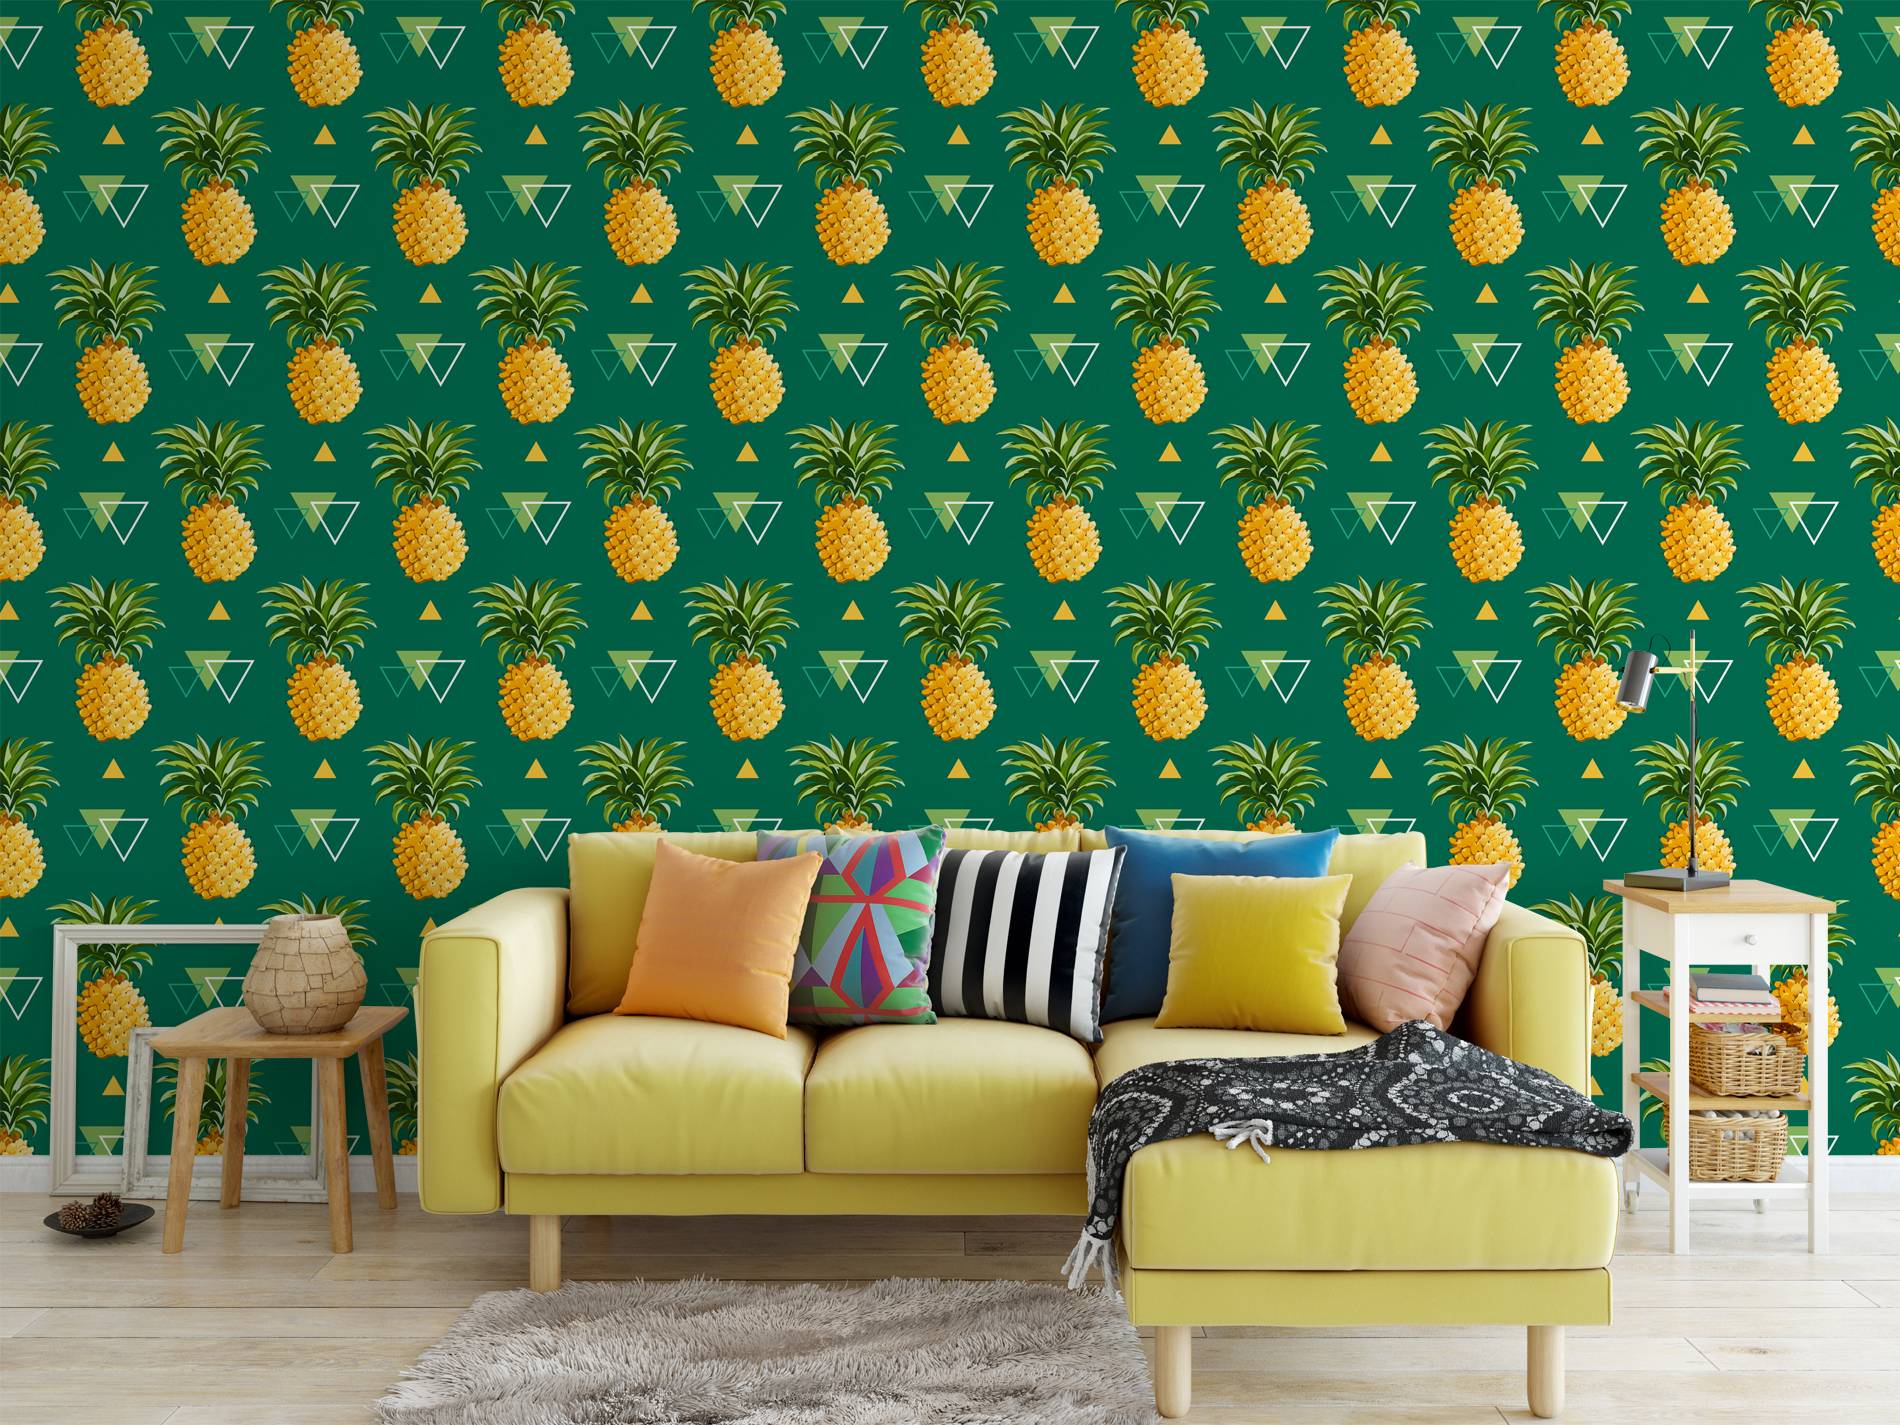 Greenery and pineapples • Living room - Contemporary - Nature - Wall Murals